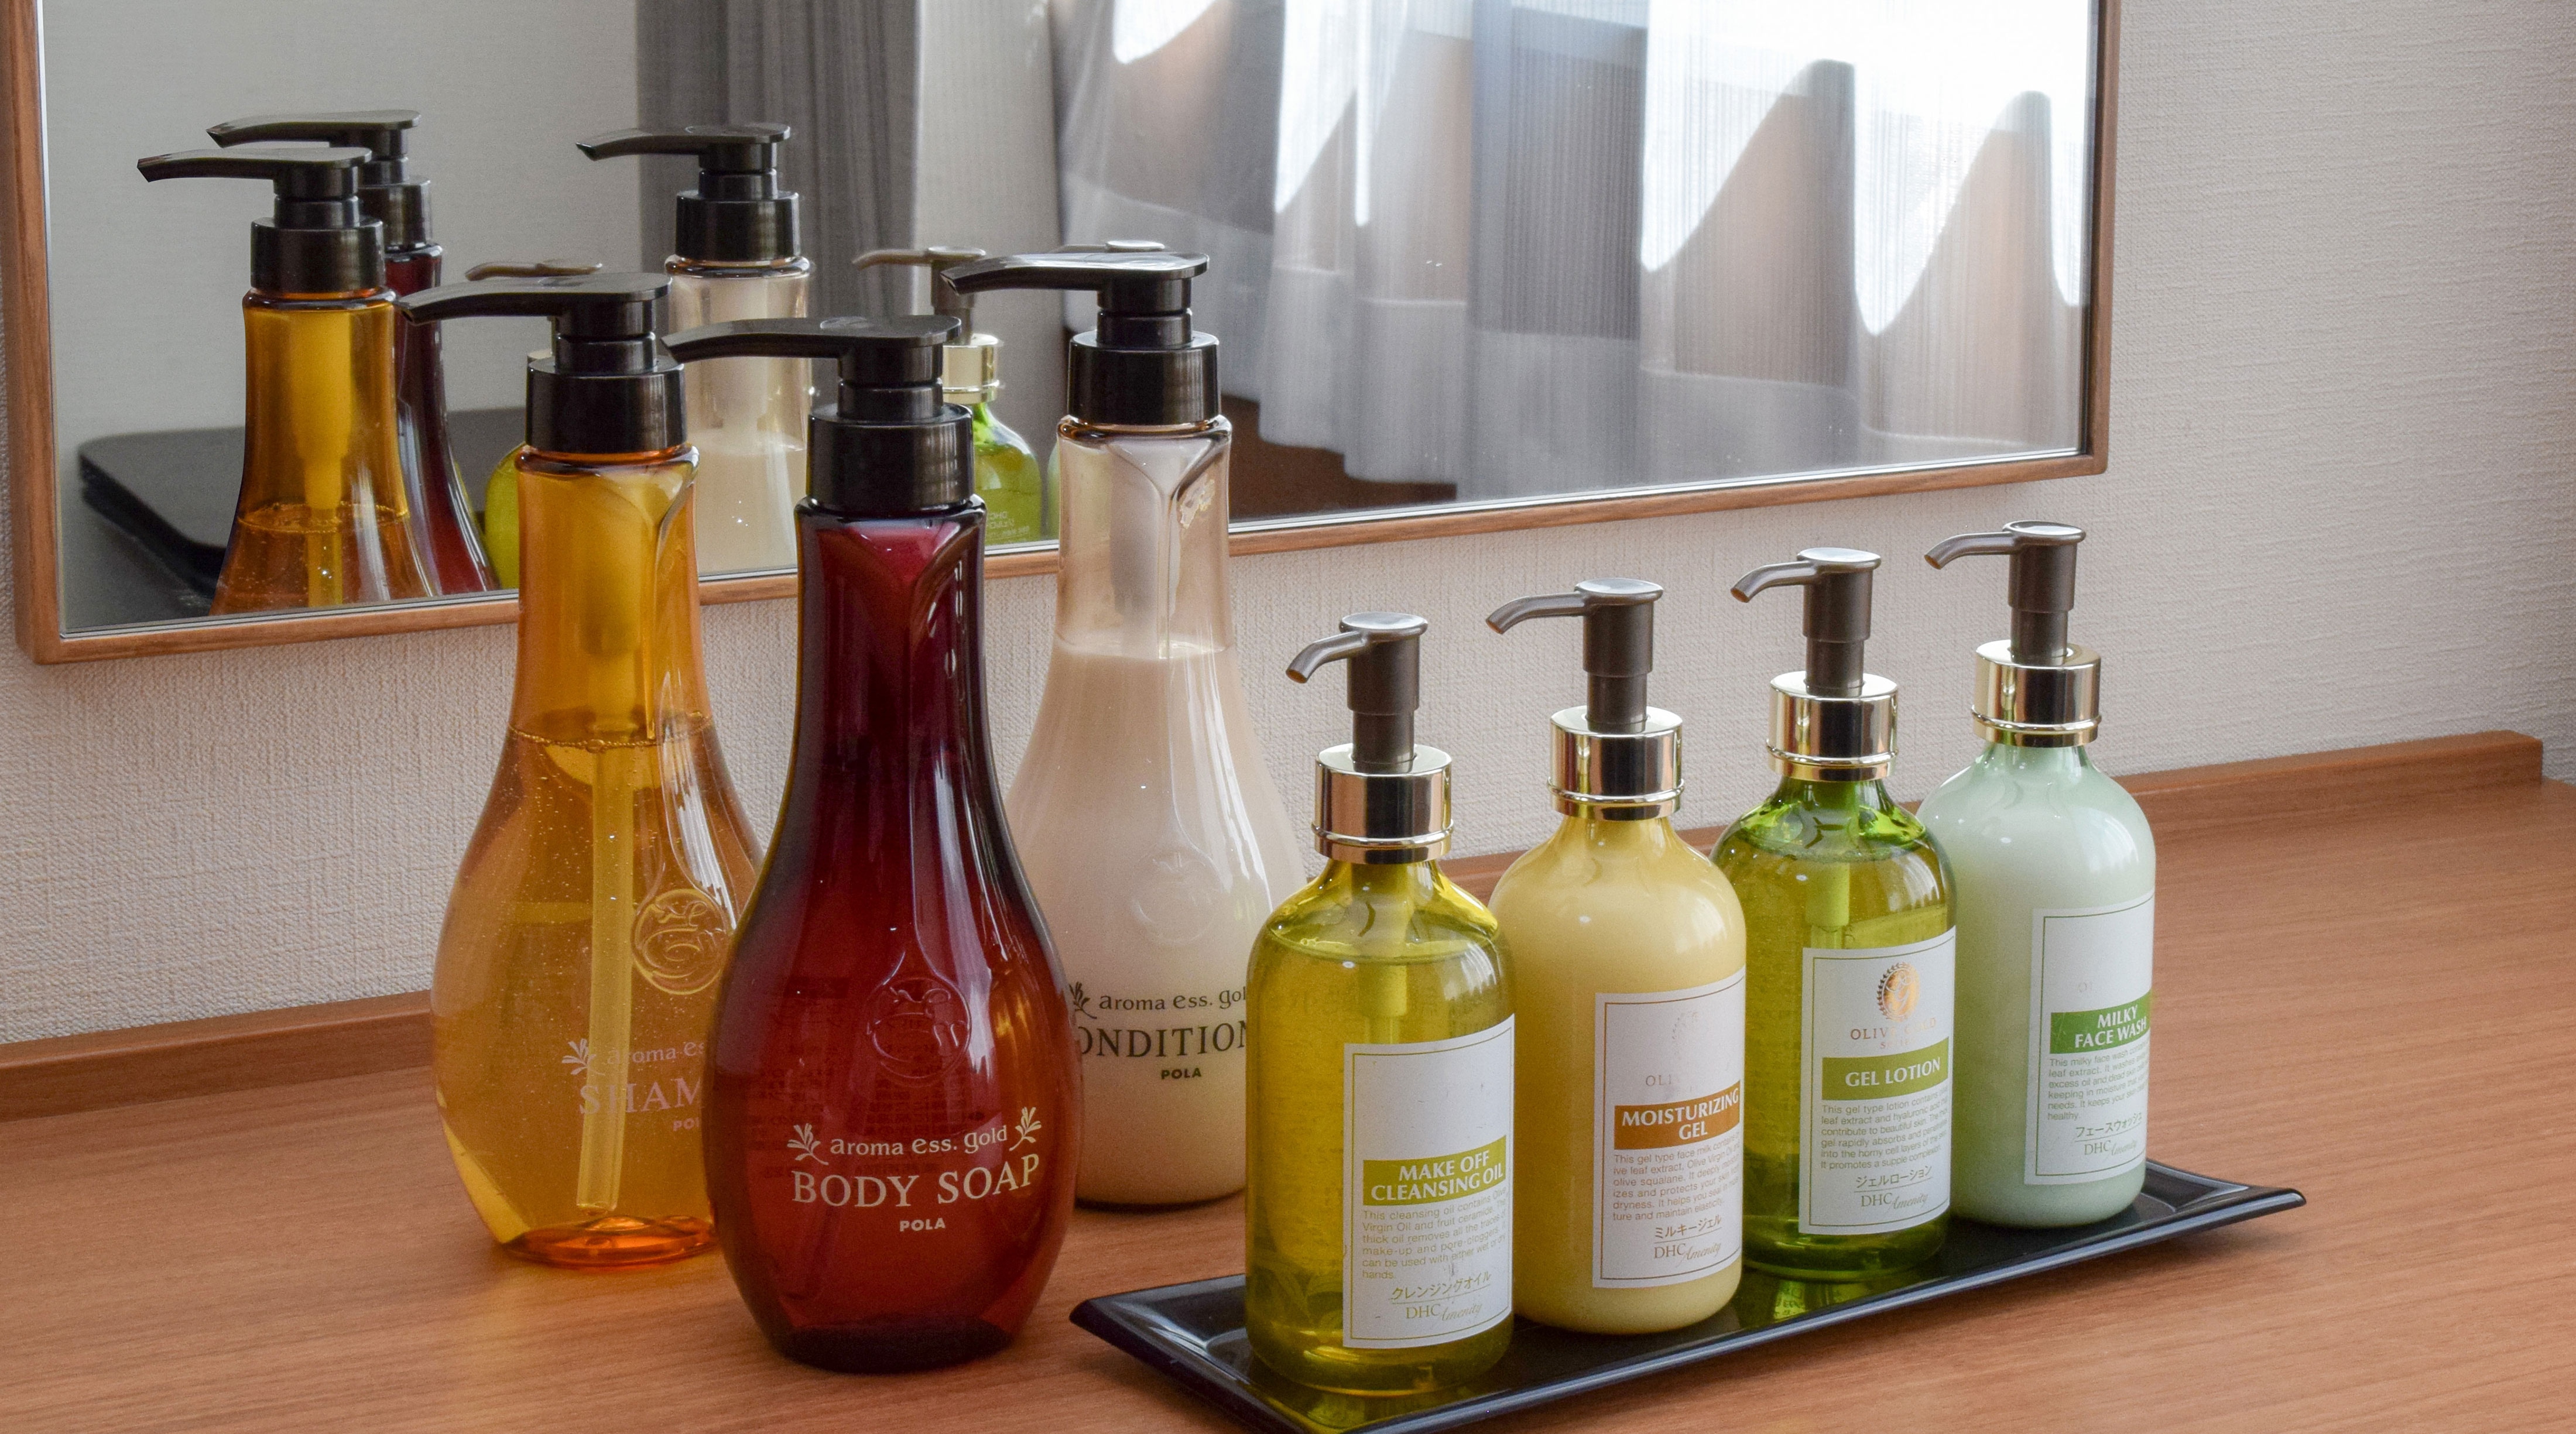 Amenities are available in all rooms. PALA shampoo, treatment, body soap, DHC skin care set